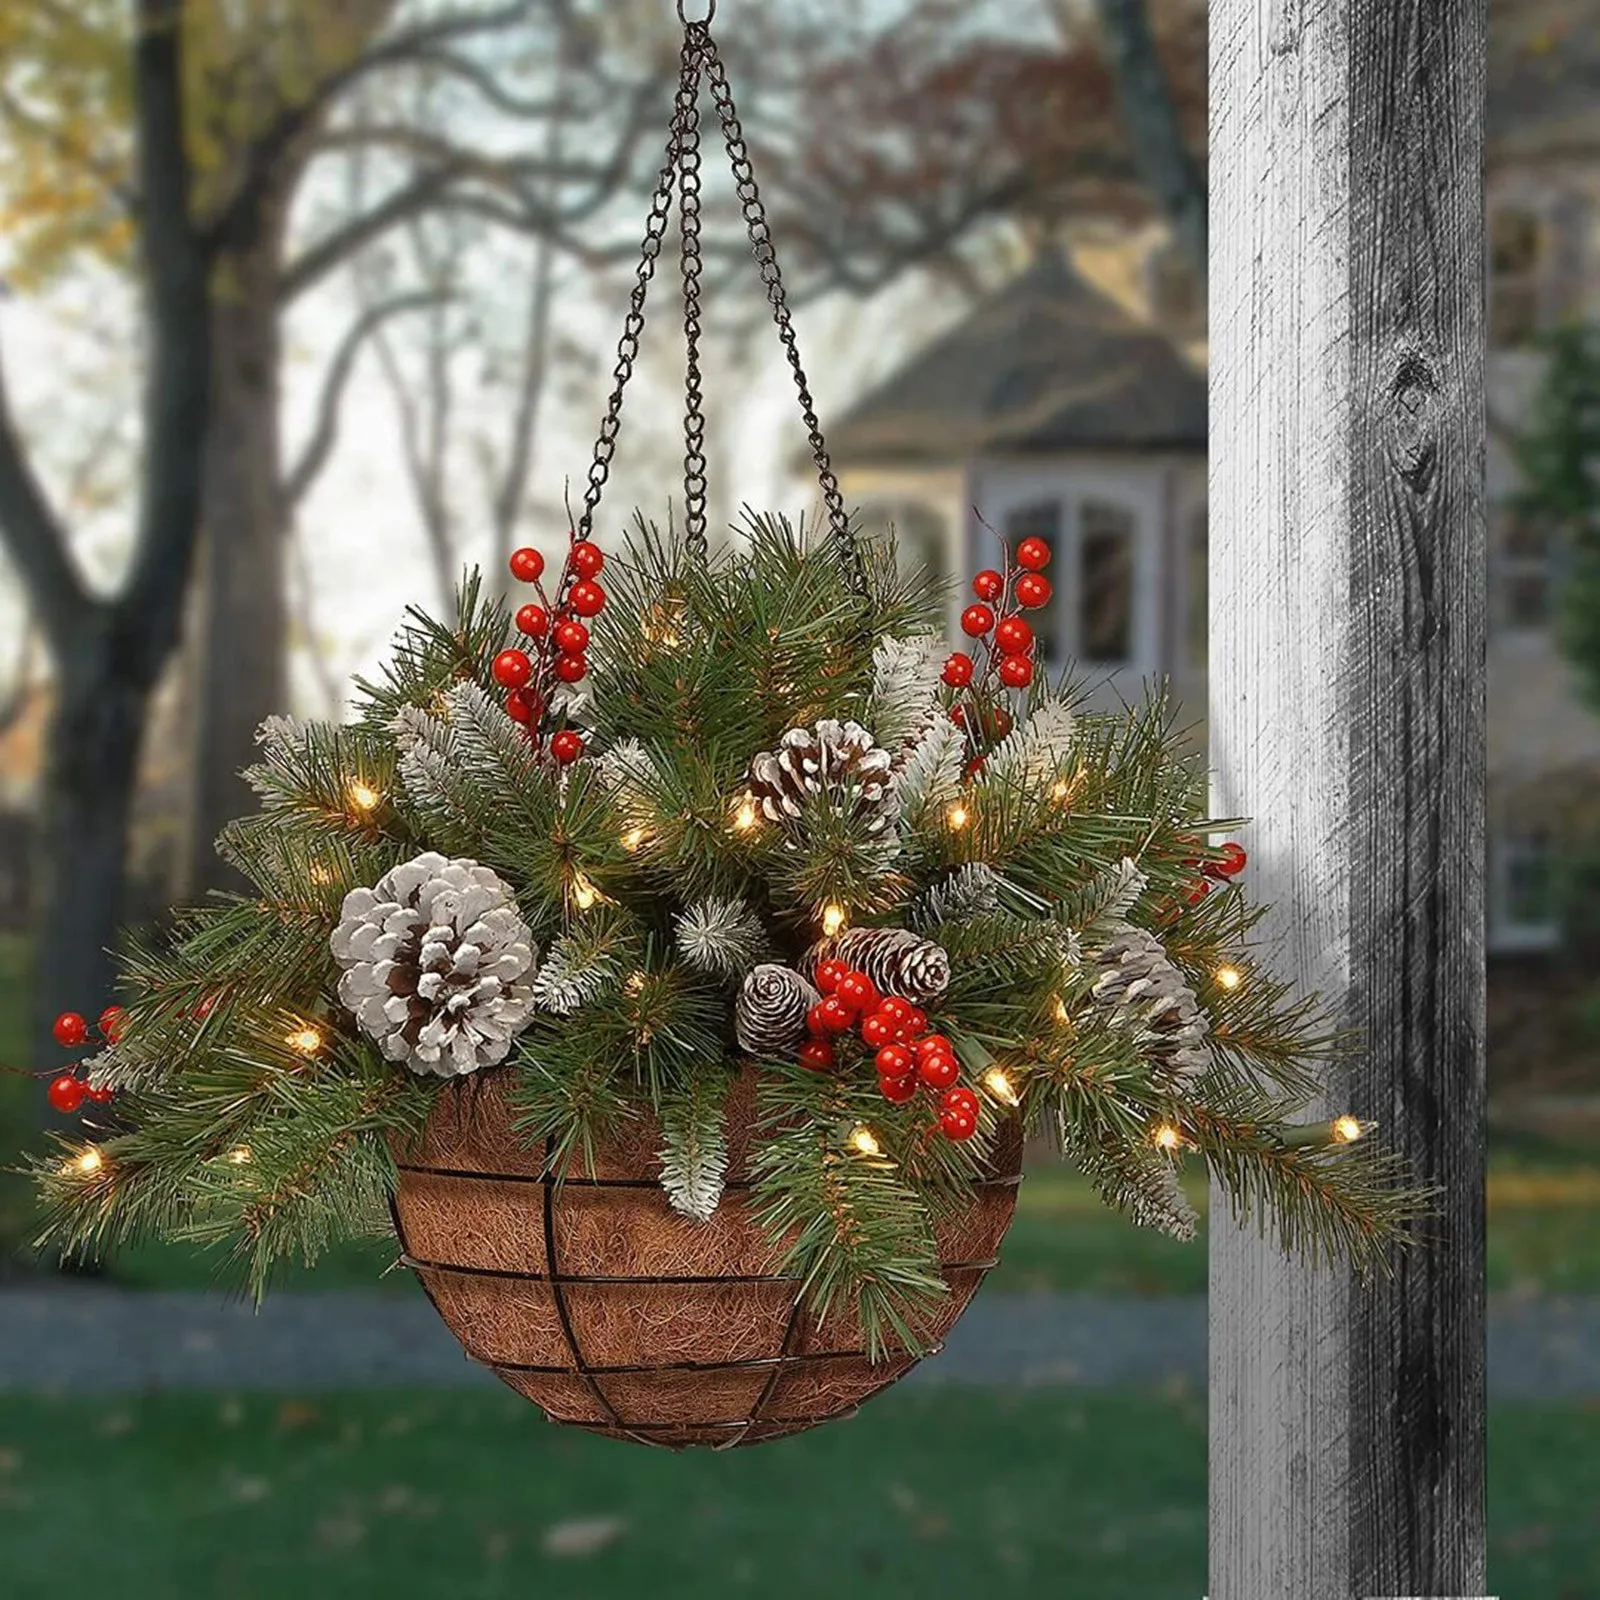 

Dazzling Pre-lit Artificial Christmas Hanging Basket - Flocked with Mixed Decorations and White LED Lights - Frosted Berry SALE